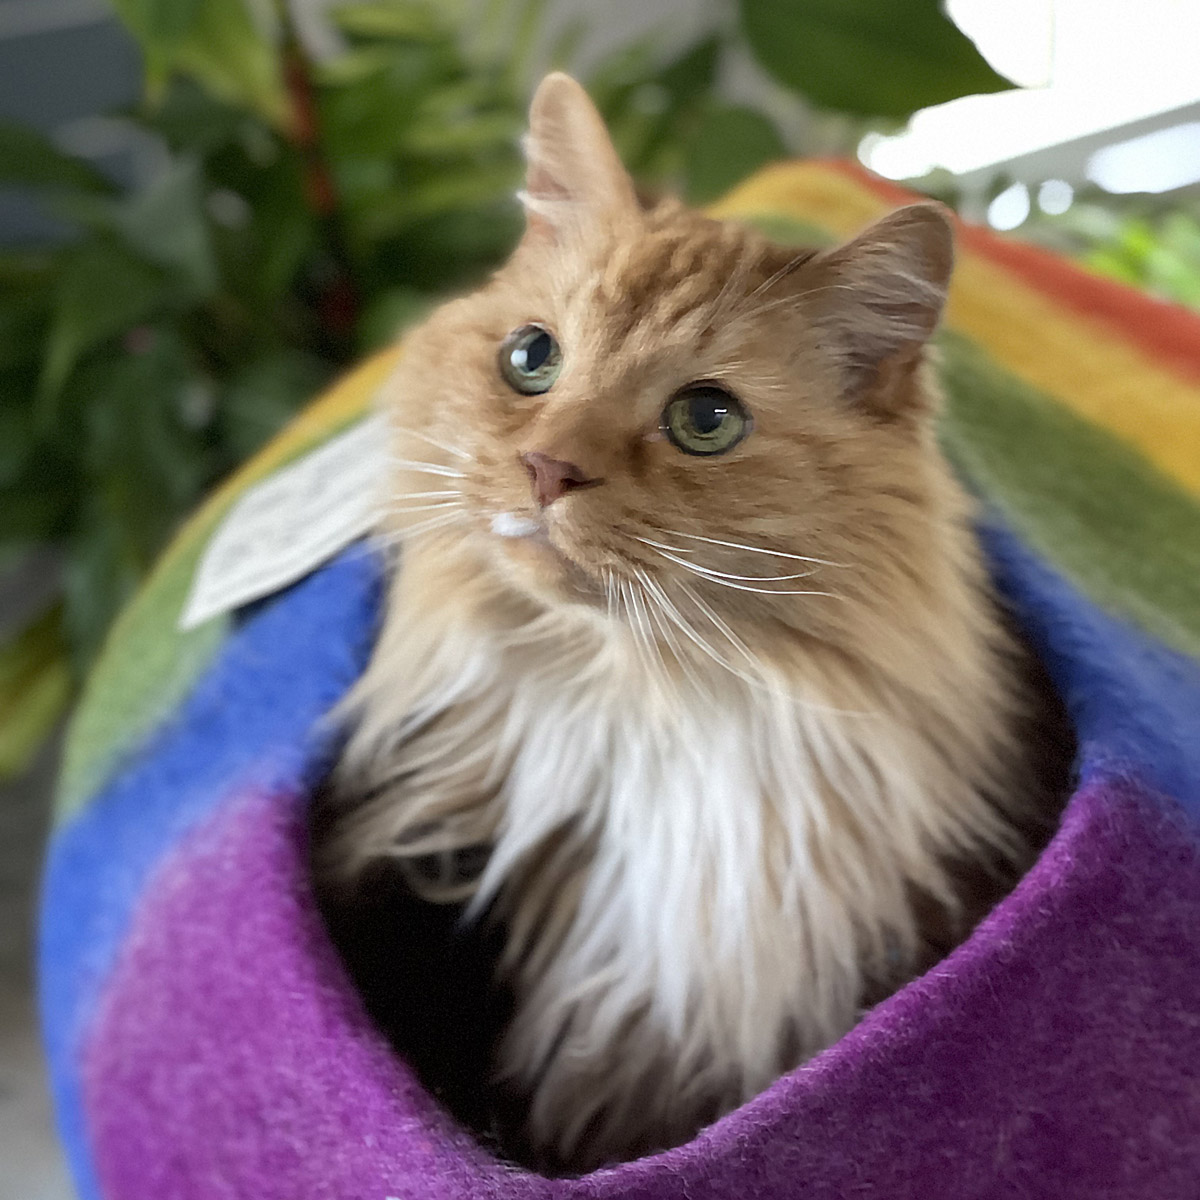 Cat poking head out of a rainbow bed